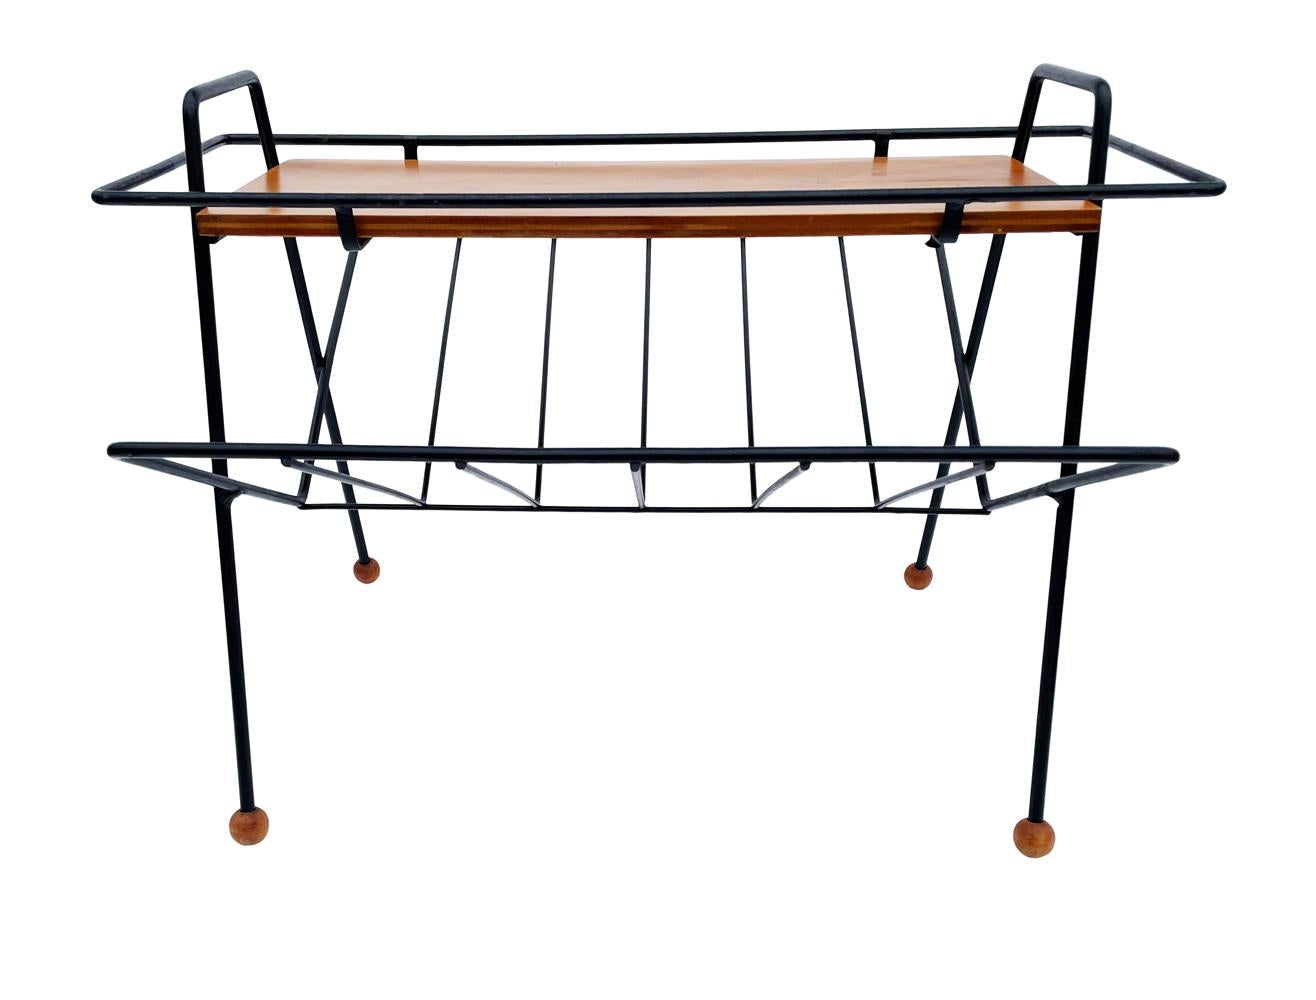 An uncommon magazine rack / table designed by Tony Paul circa 1950's. It features black metal framing with maple wood accents.